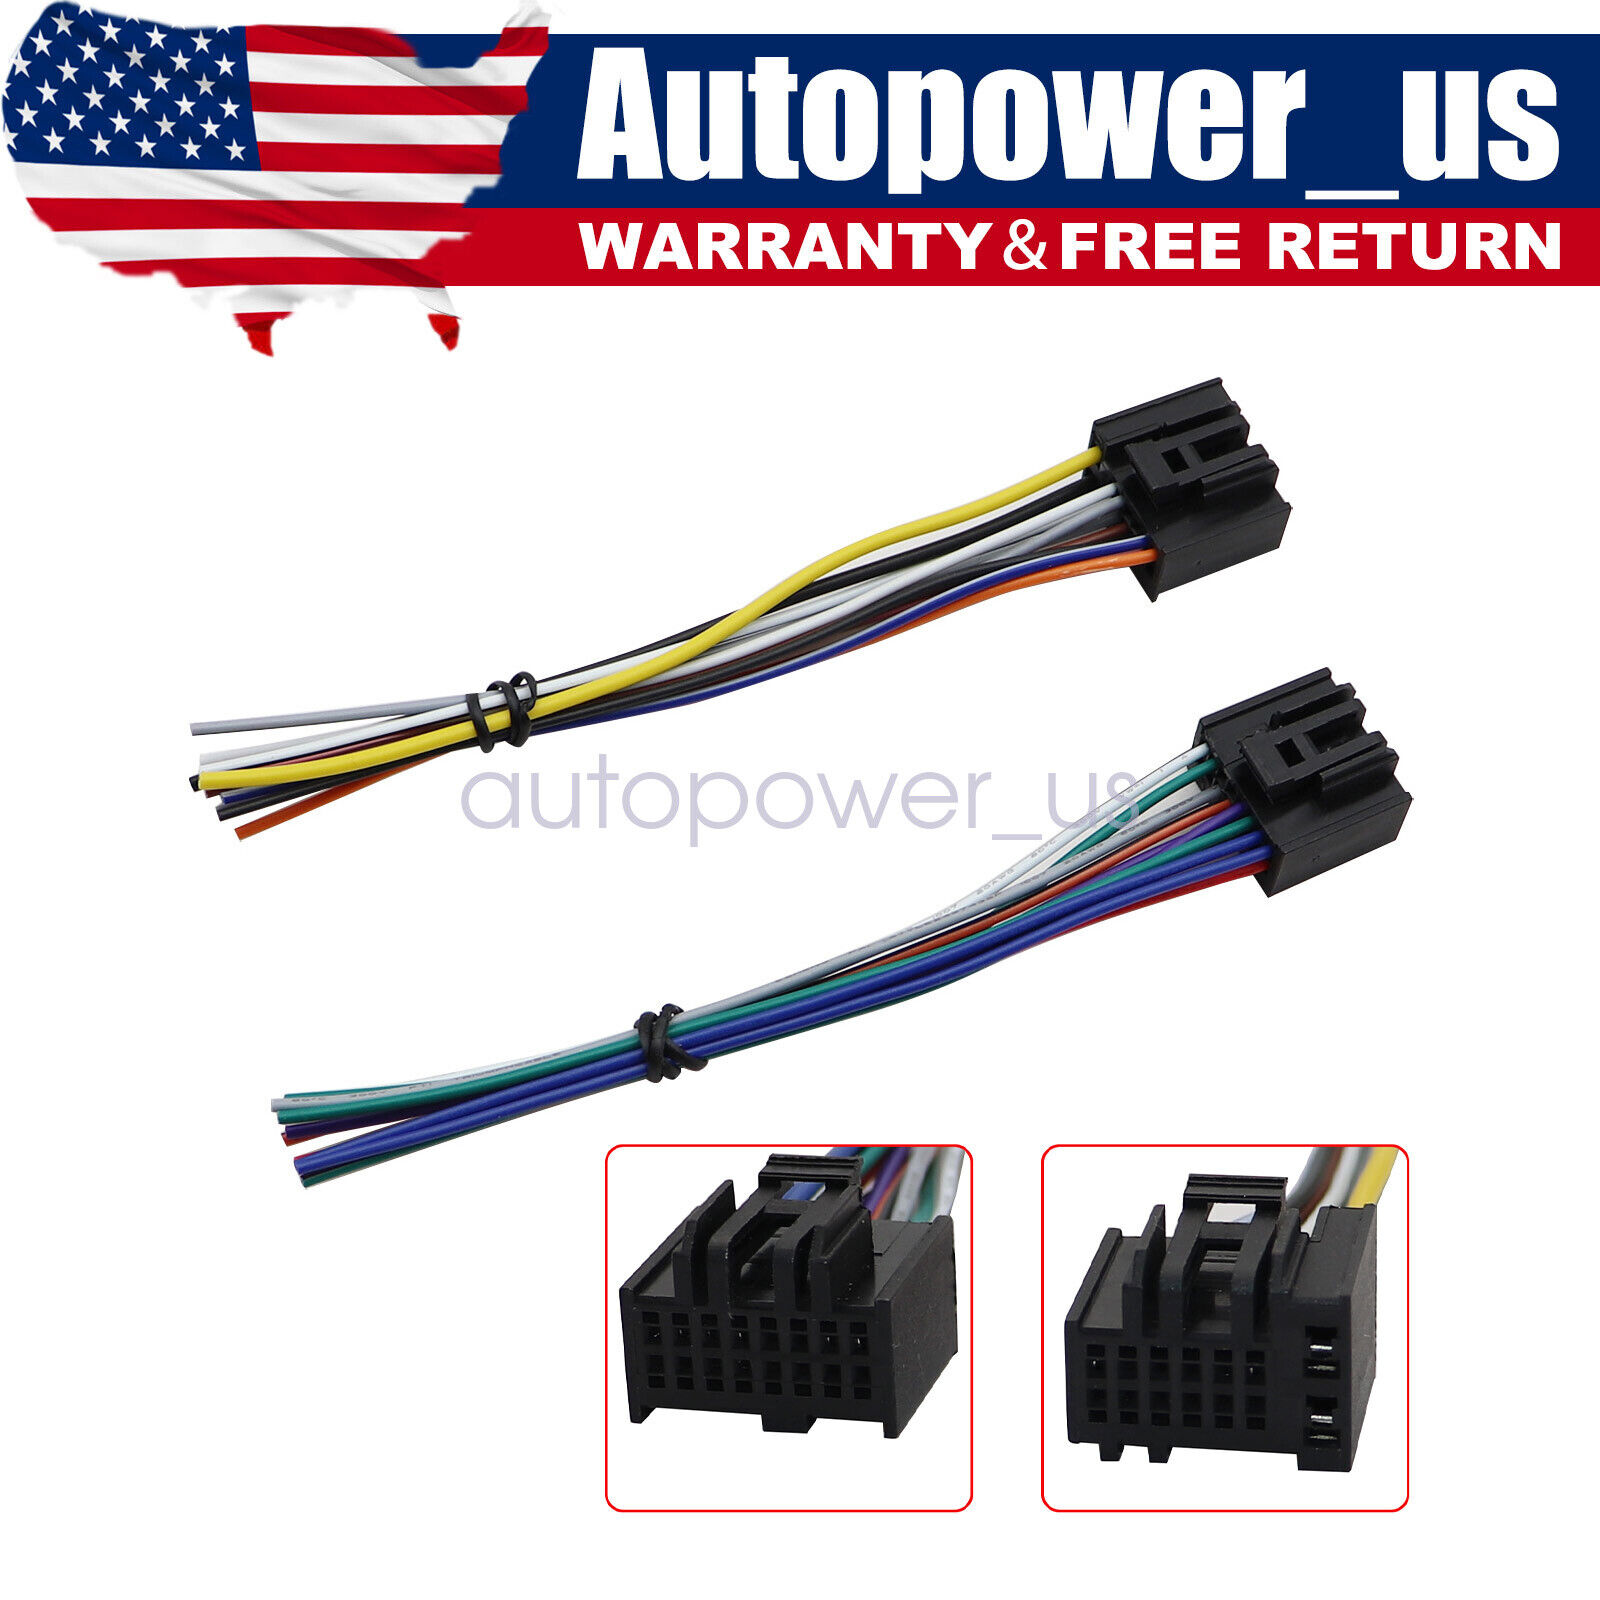 Car Factory Stereo Radio Wire Harness Fit for Chevrolet GMC Pontiac Buick